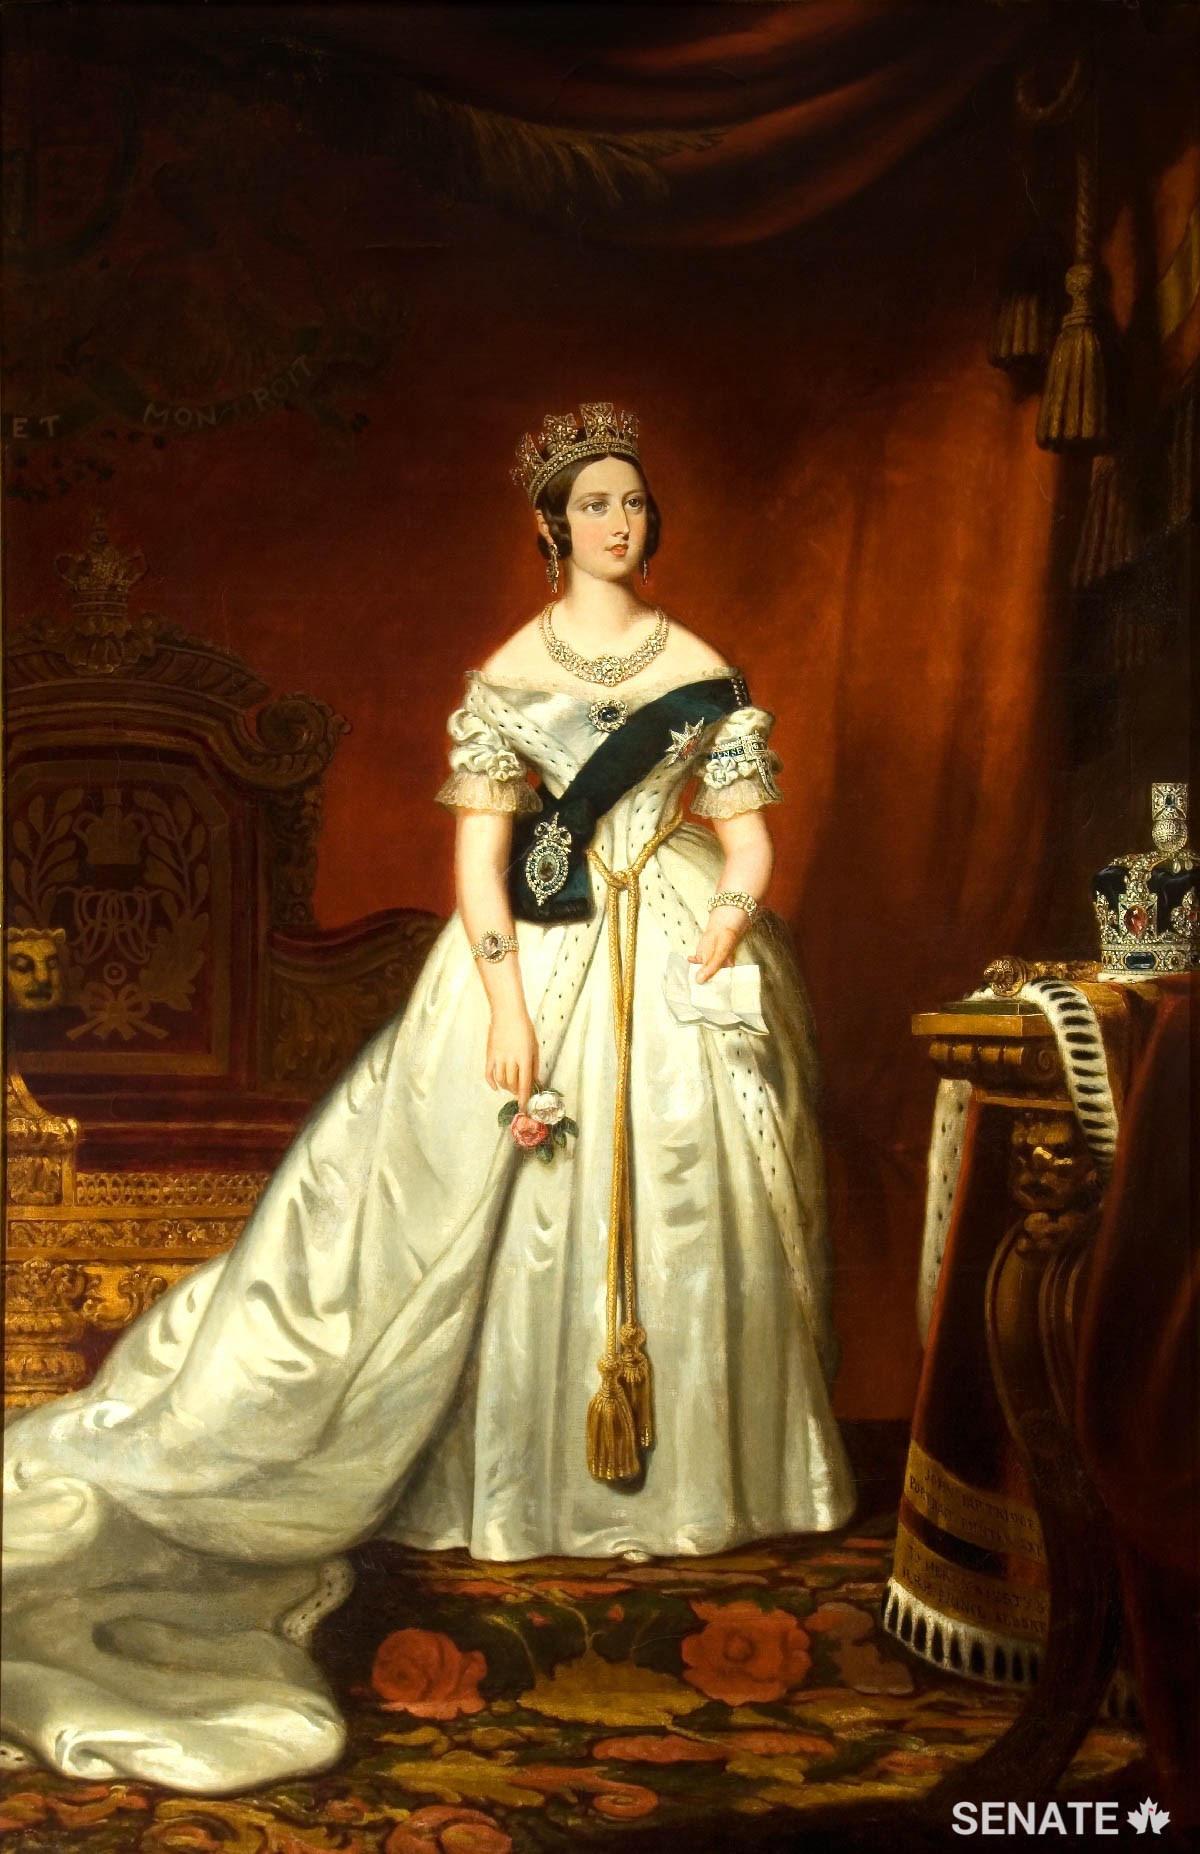 The state portrait of Queen Victoria was acquired in 1849 to hang in Montreal’s Bonsecours Market, which briefly housed the Parliament of the Province of Canada. The painting escaped four fires before coming to hang in the Senate foyer.